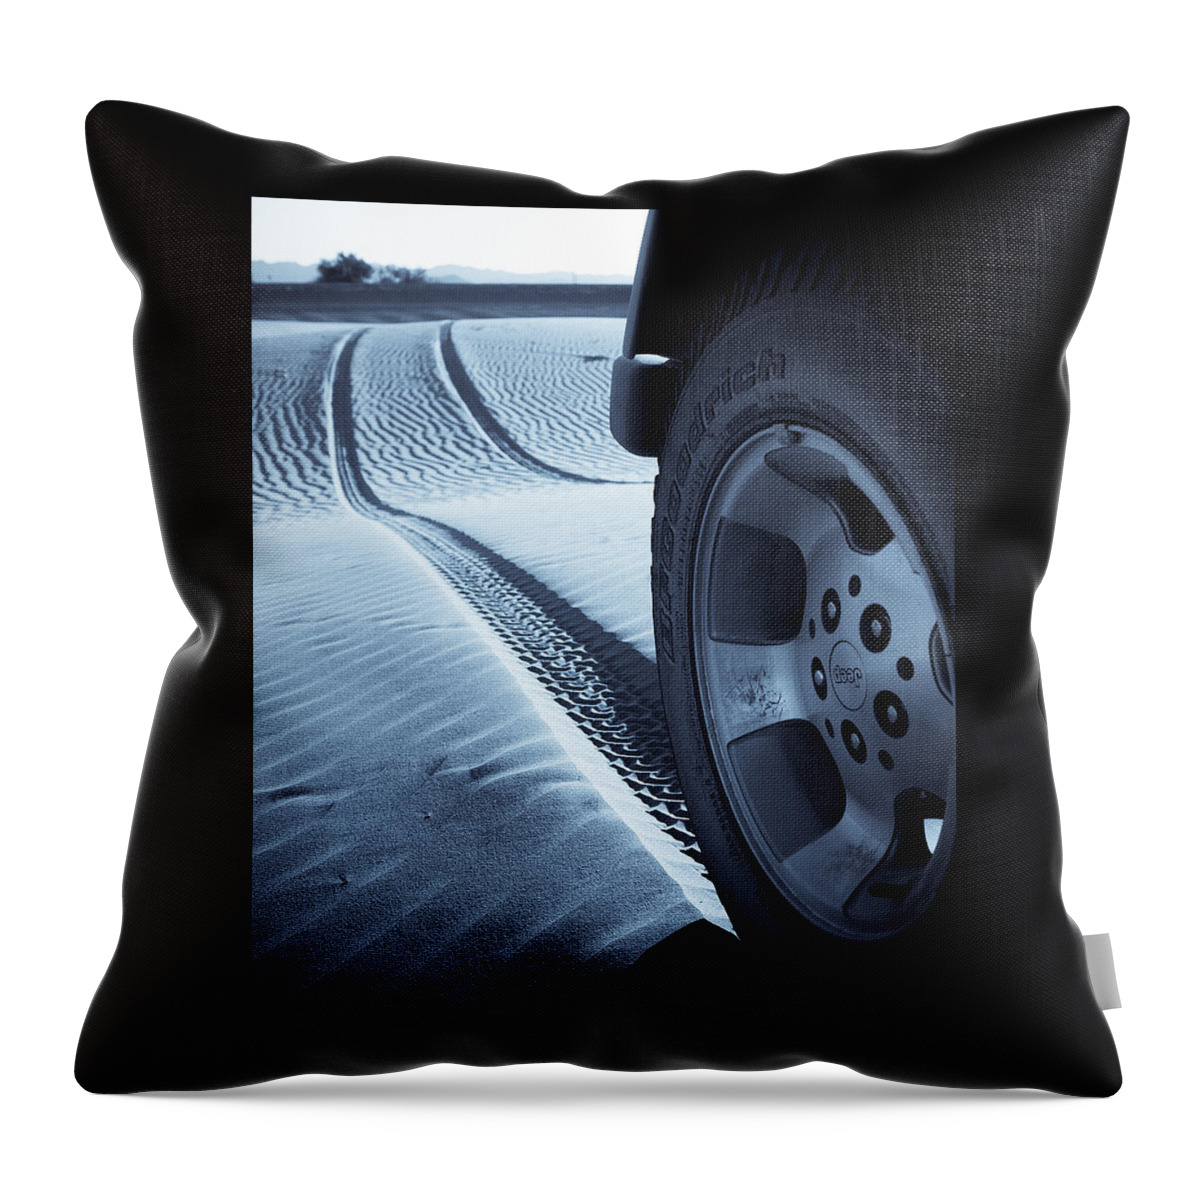 Jeep Throw Pillow featuring the photograph Jeep Tire Track by Scott Sawyer